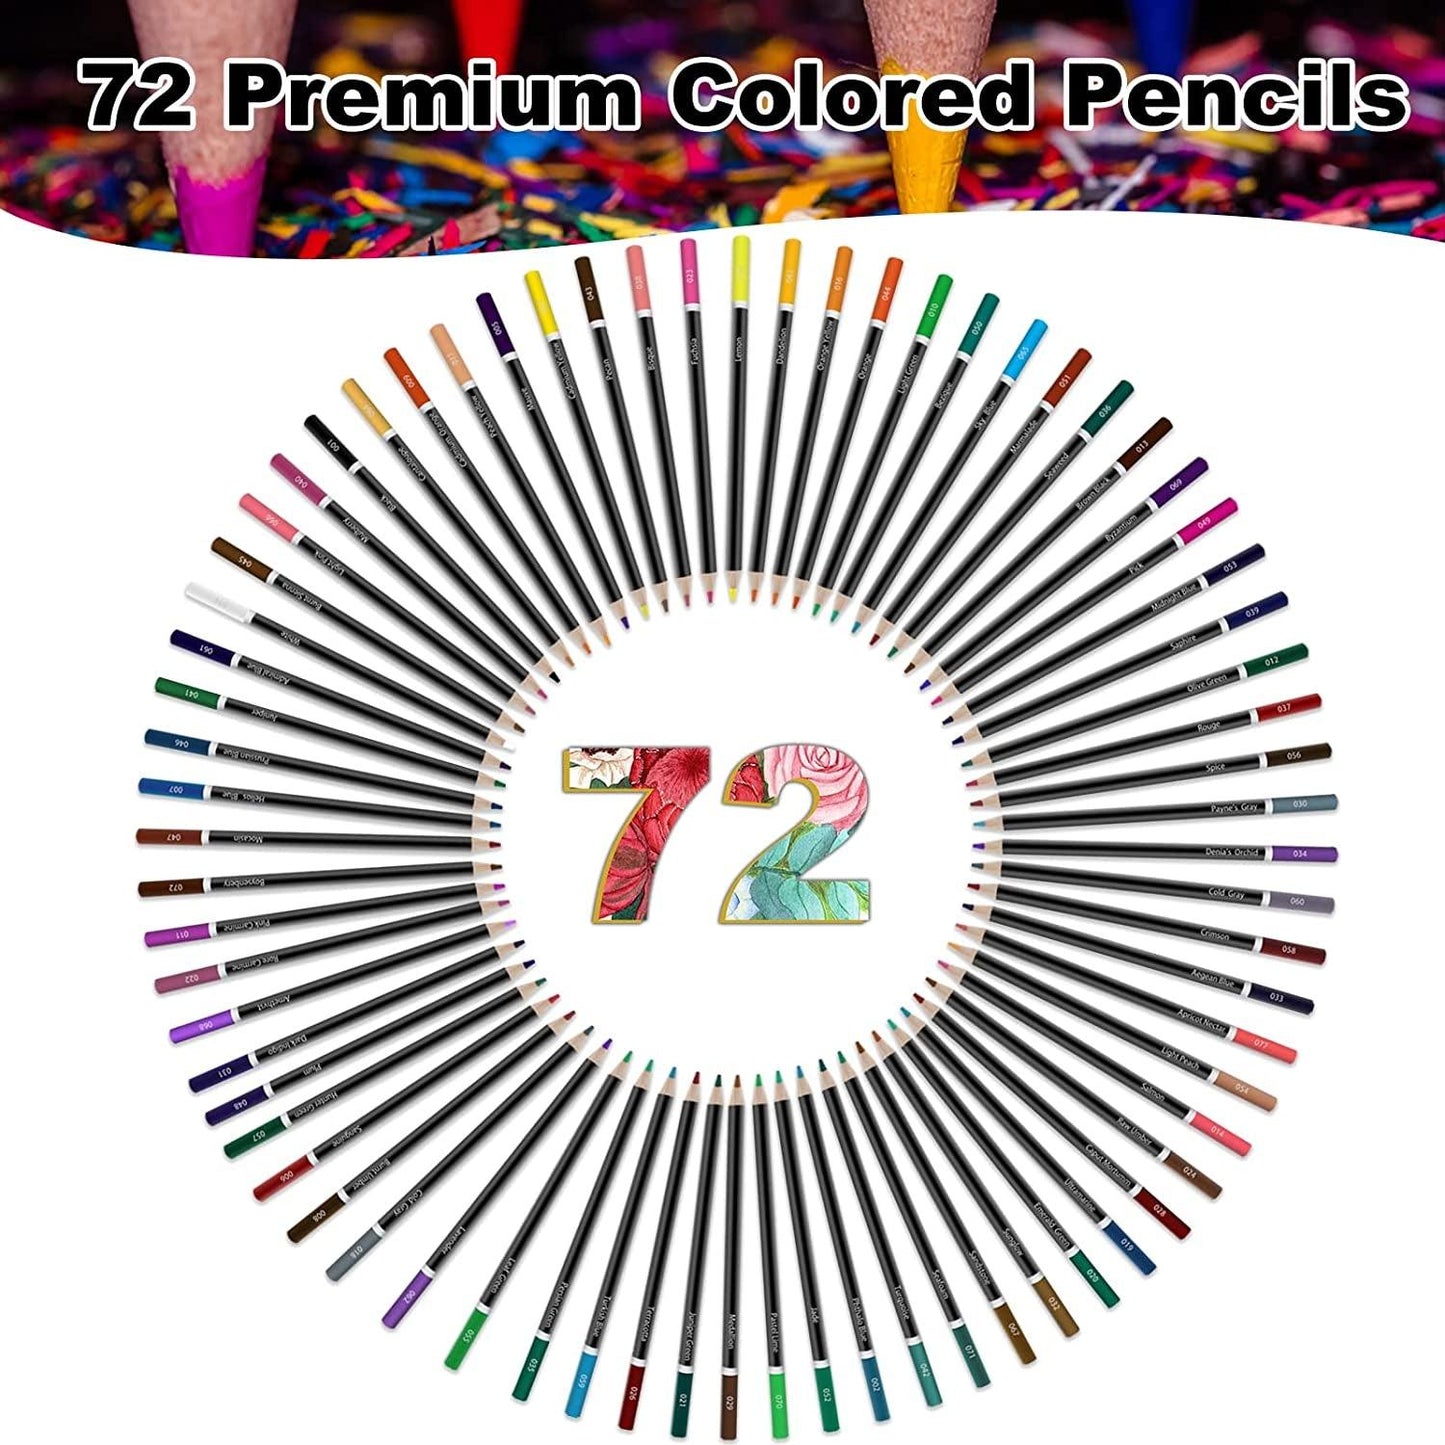 Colored Pencils for Adult Coloring Books, 72 Colored Professional Drawing Pencils, Art Supplies - WoodArtSupply